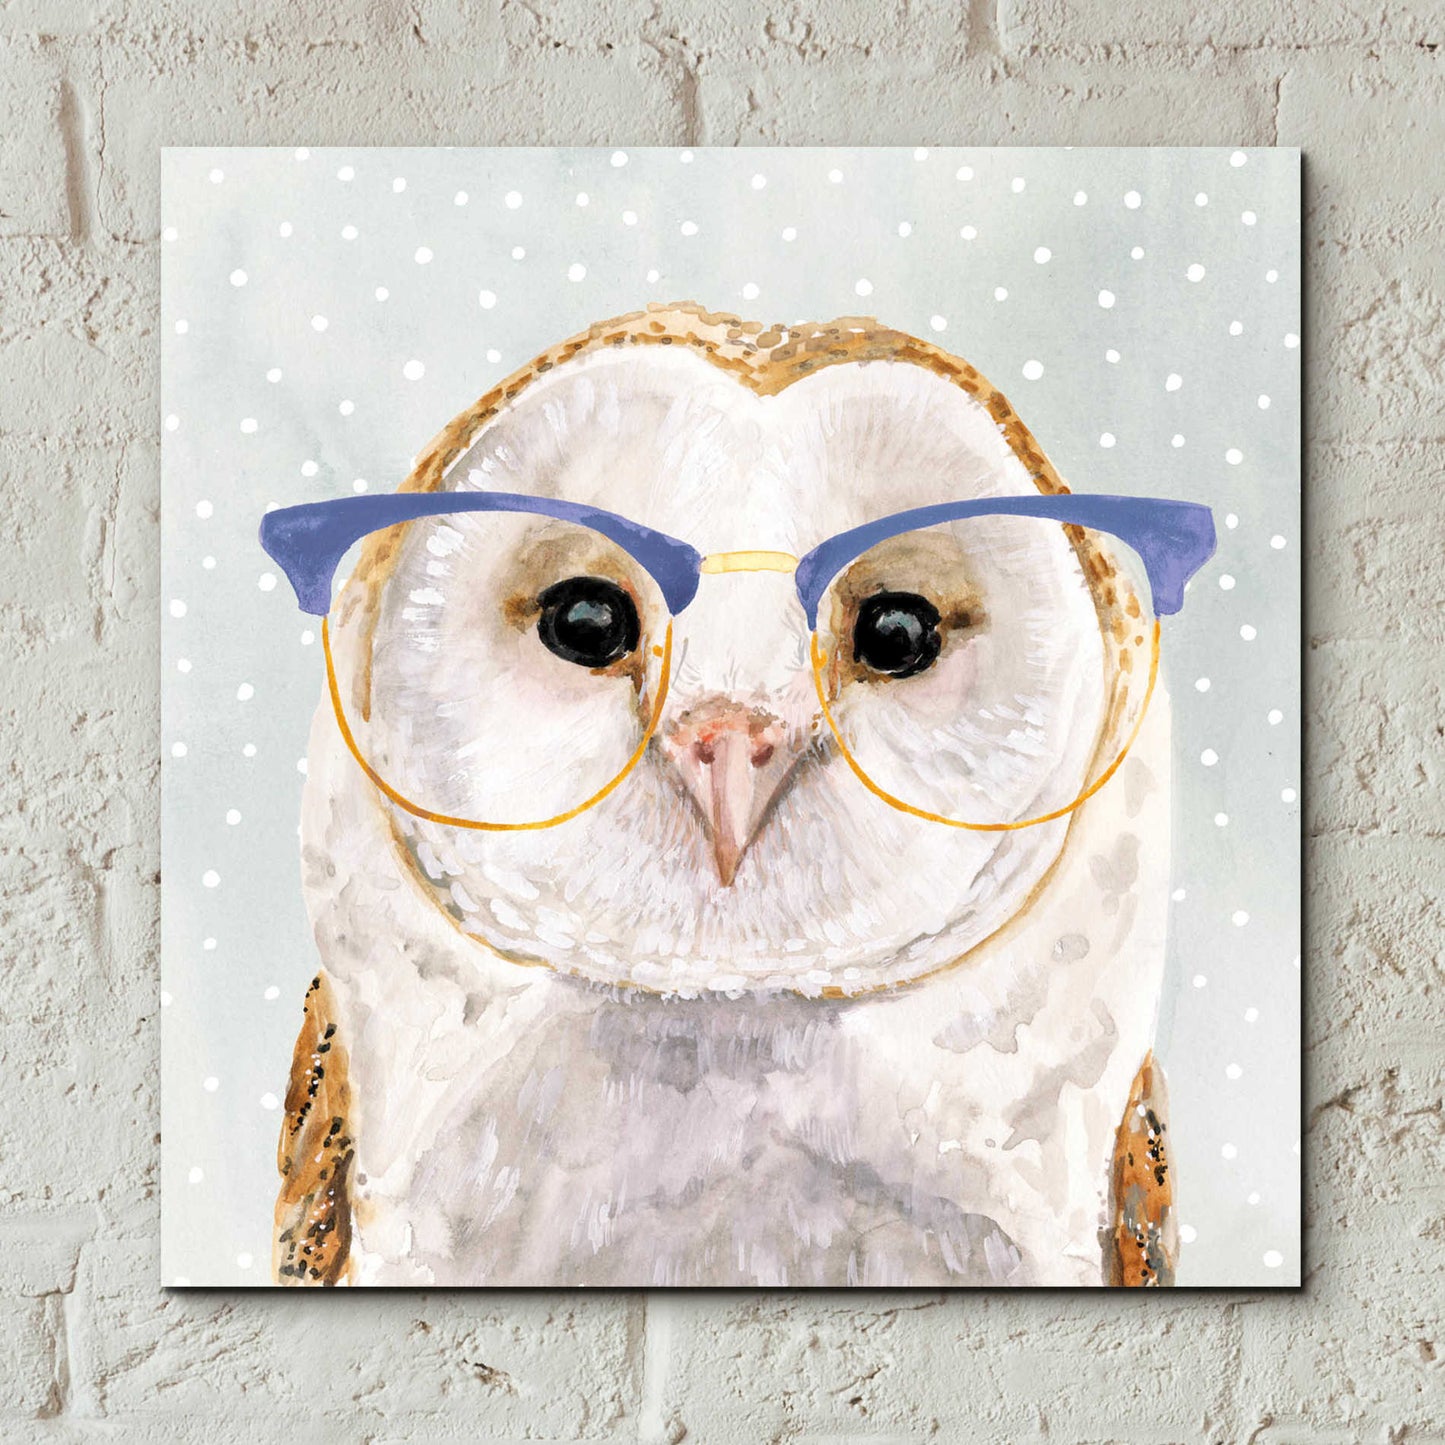 Epic Art 'Four-Eyed Forester II' by Victoria Borges, Acrylic Glass Wall Art,12x12